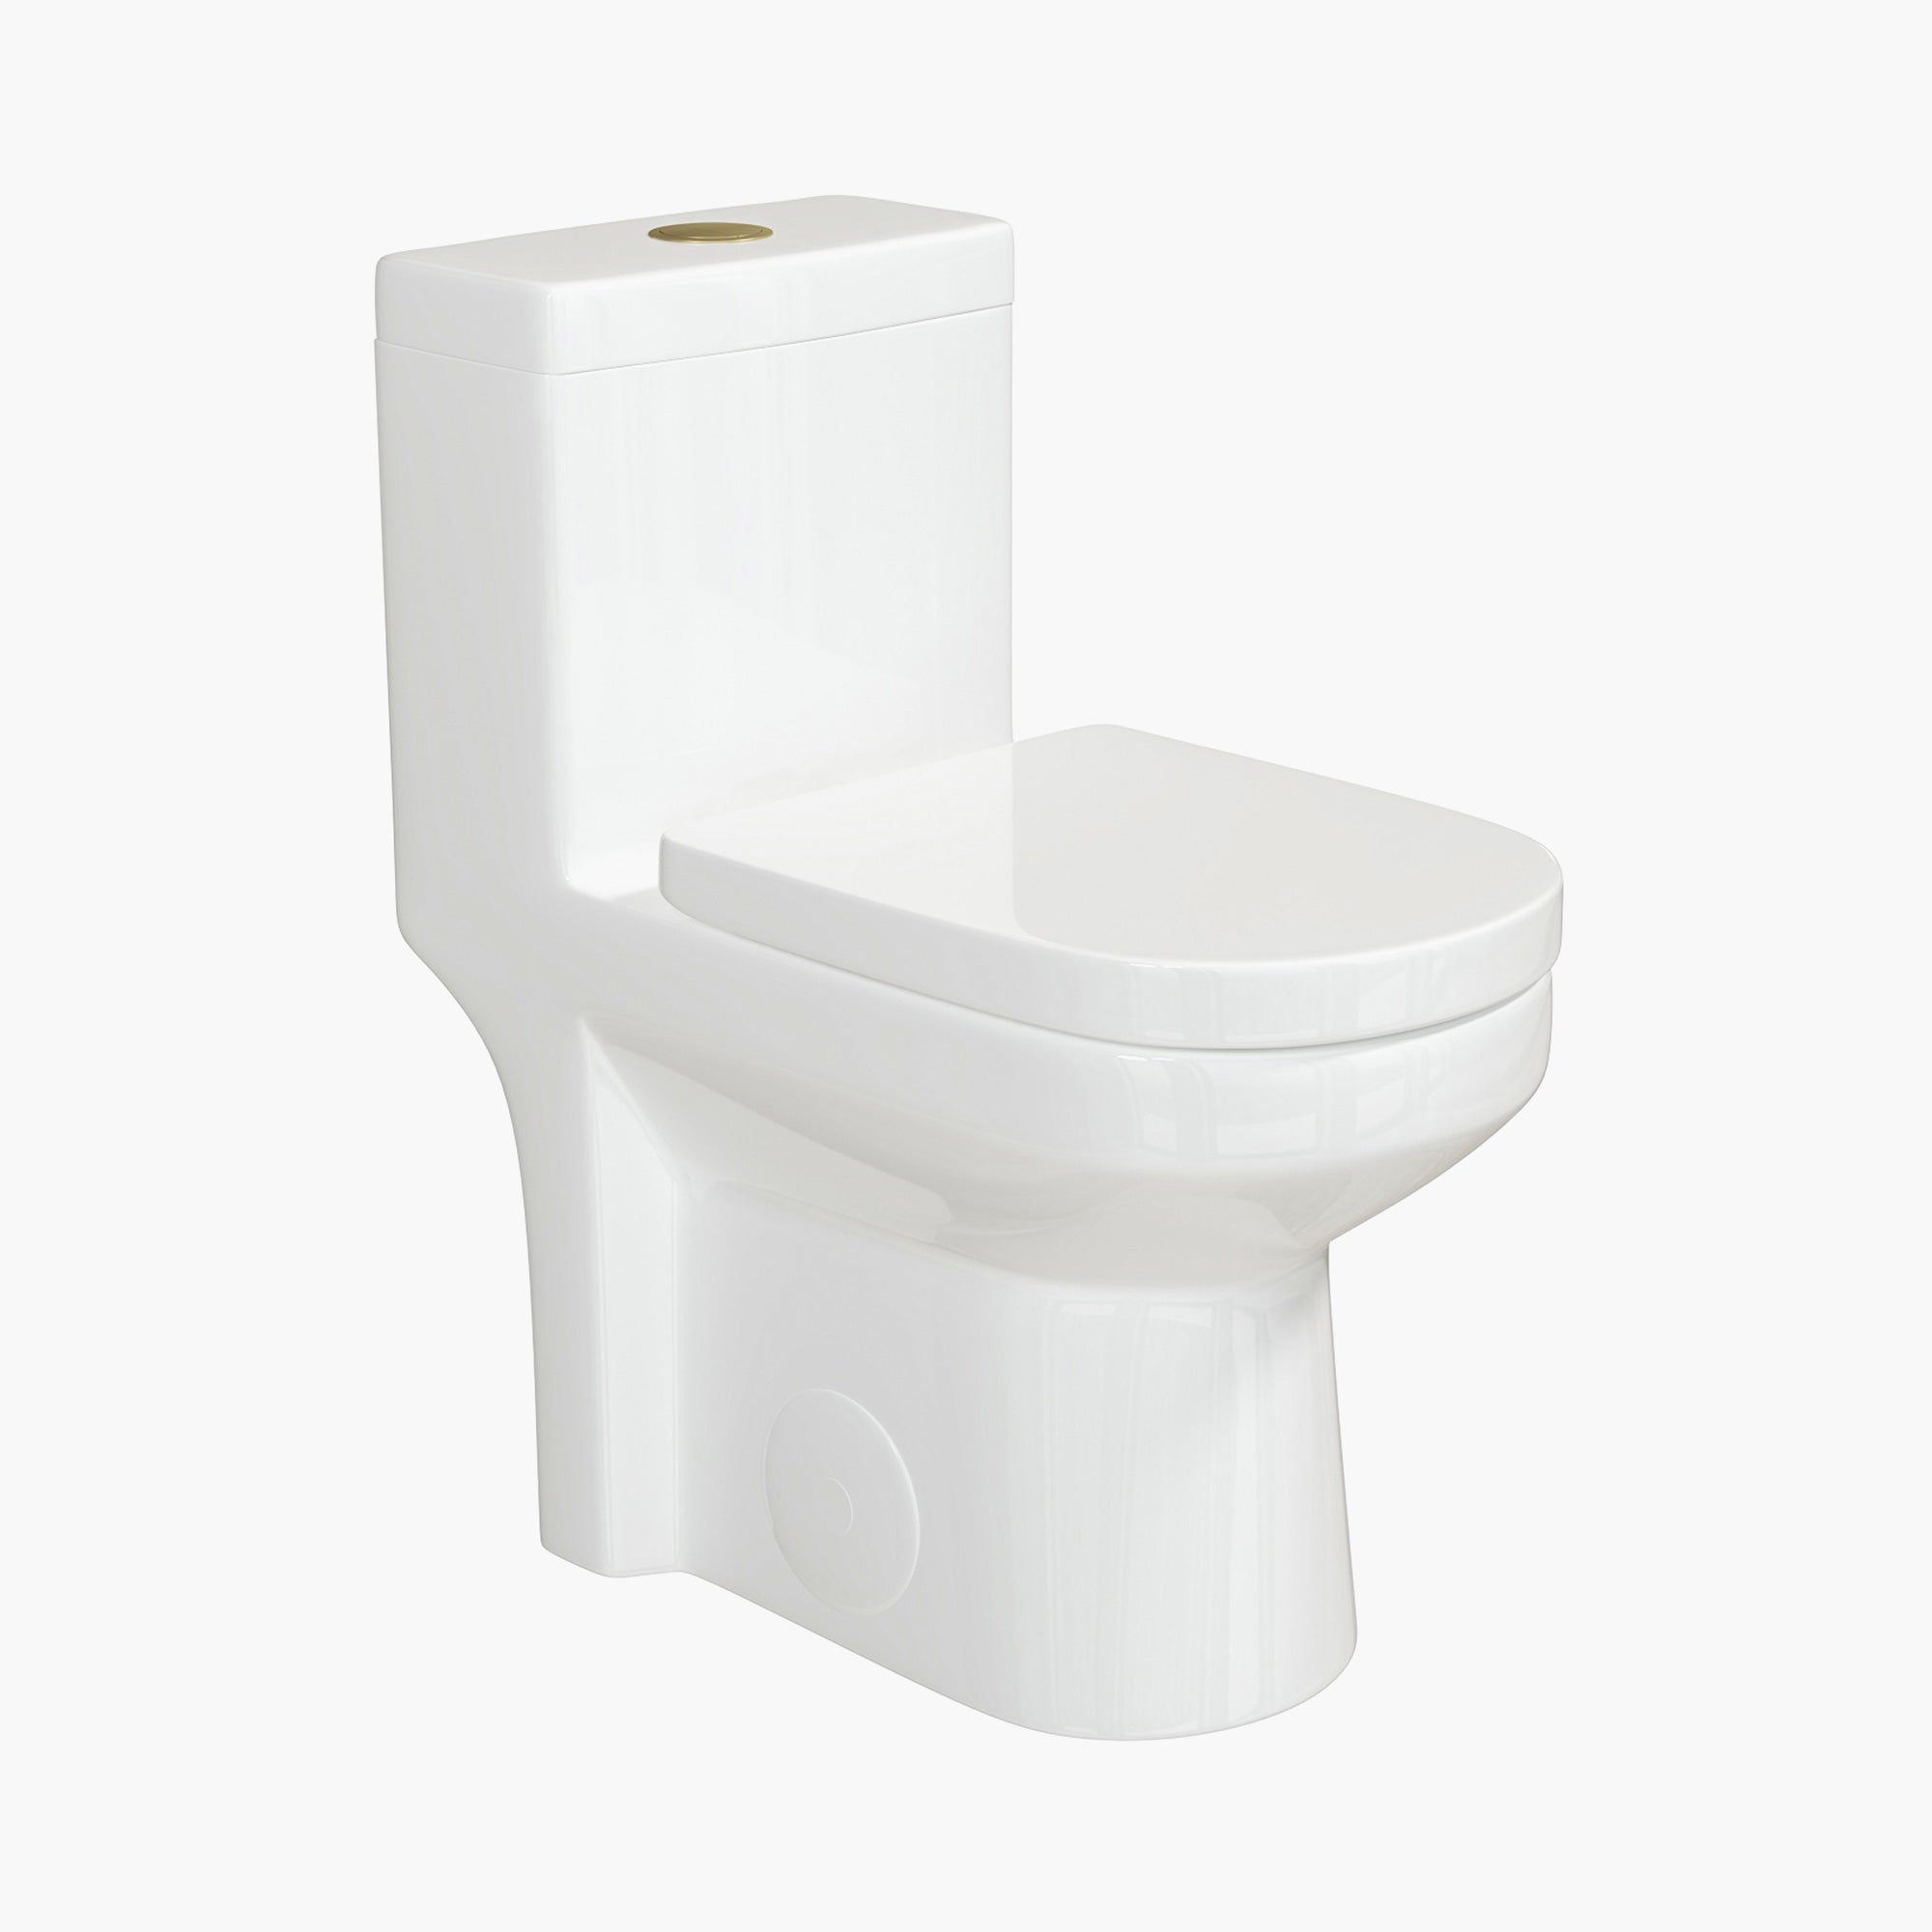 HOROW Small Compact Toilet With Gold Button For Bathroom Model 8733G